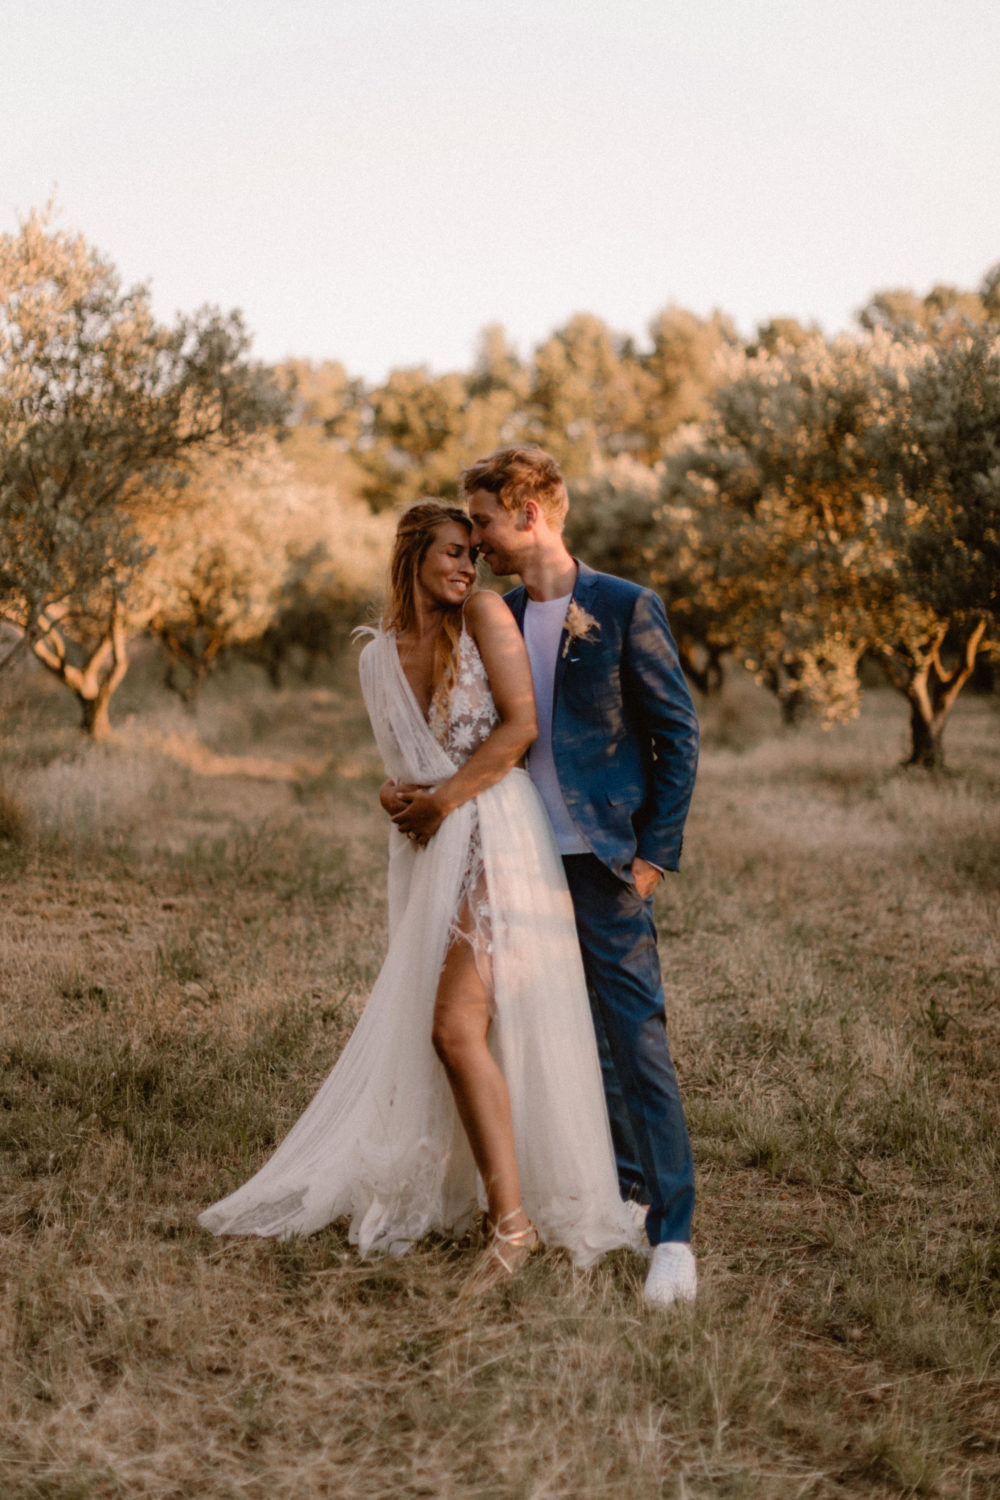 Wedding in Provence